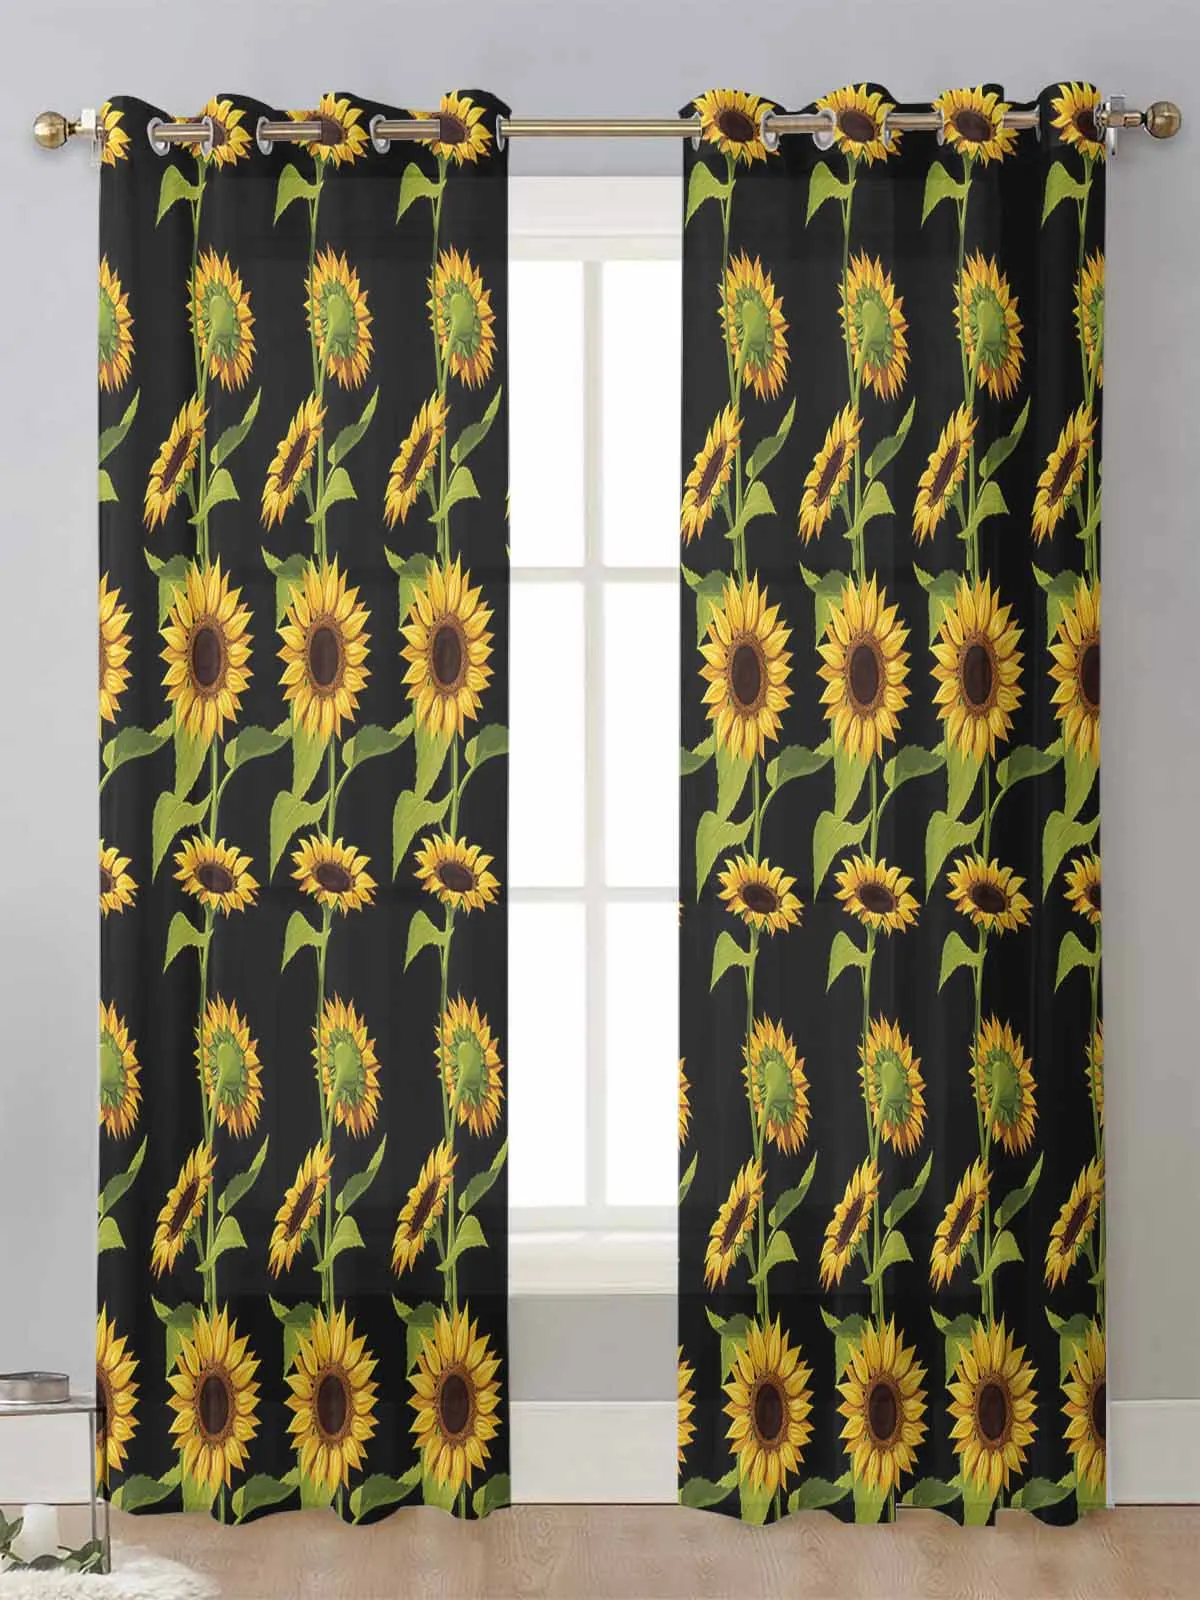 

Sunflower Texture Black Retro Sheer Curtains For Living Room Window Transparent Voile Tulle Curtain Cortinas Drapes Home Decor